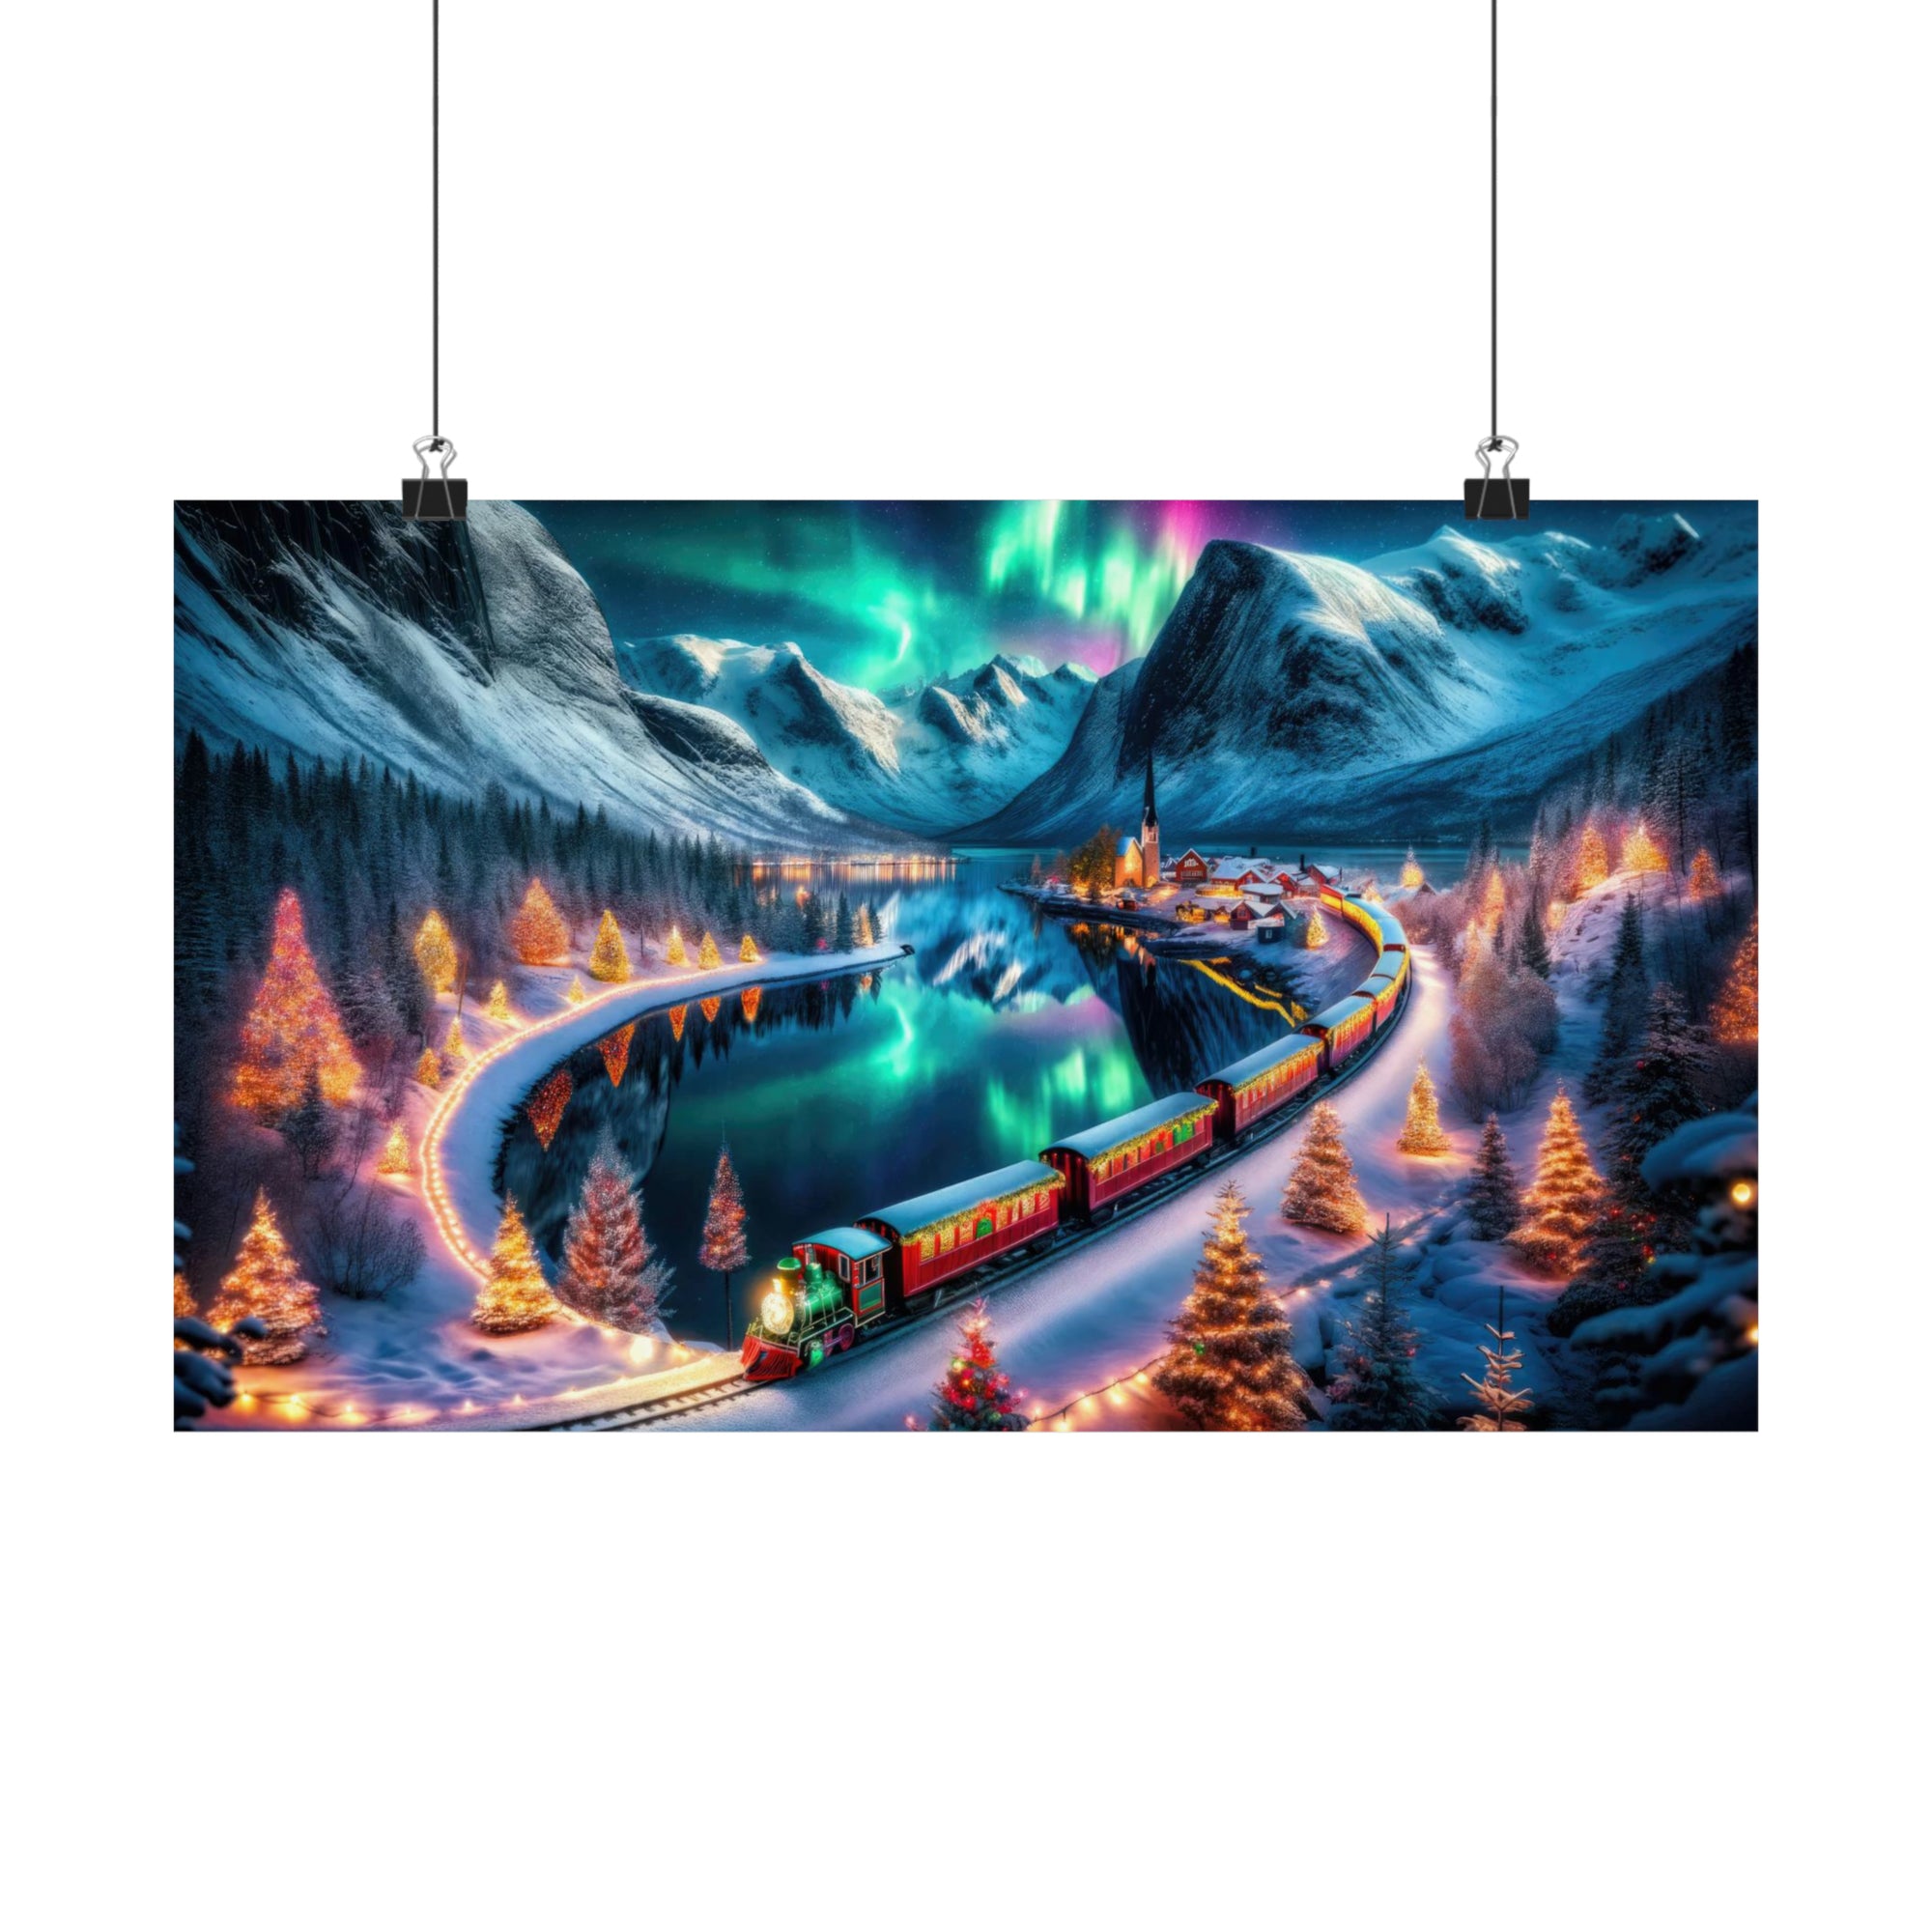 A Winter's Eve Journey Poster